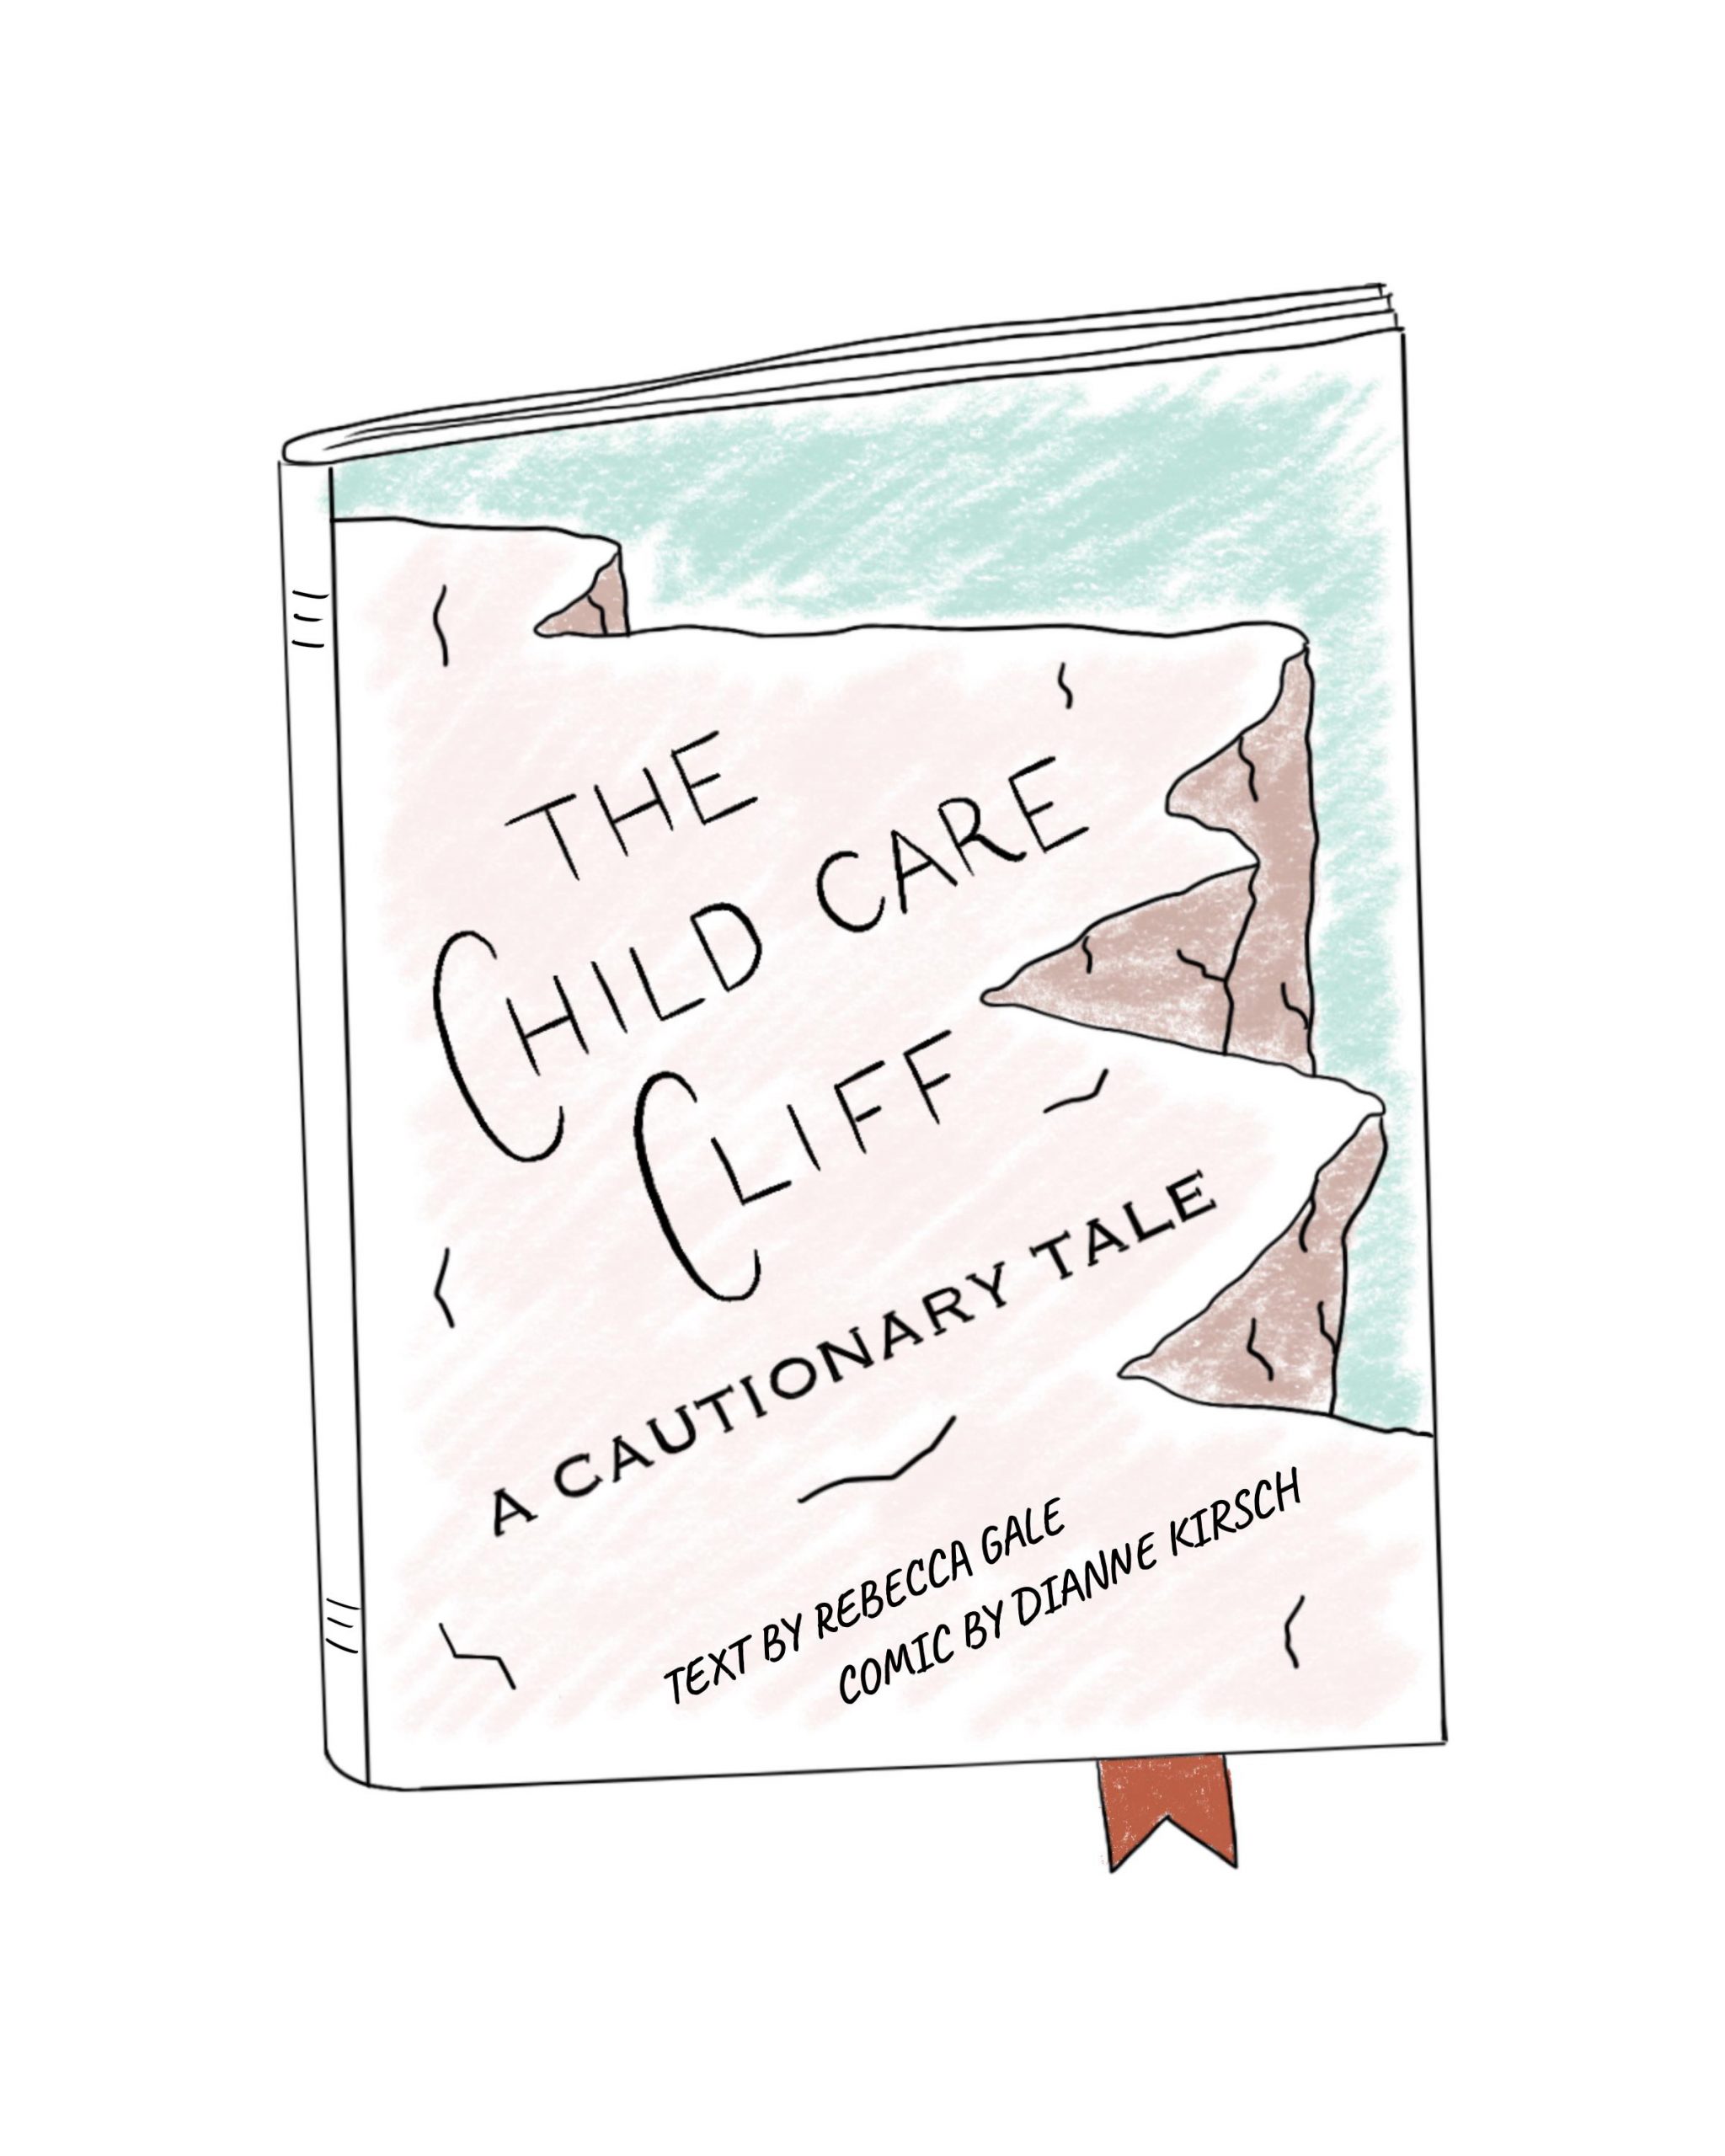 The Child Care Cliff, A Cautionary Tale. 
A graphic story on the child care cliff and end of ARPA funding for child care. Text by Rebecca Gale and Comic by Dianne Kirsch
